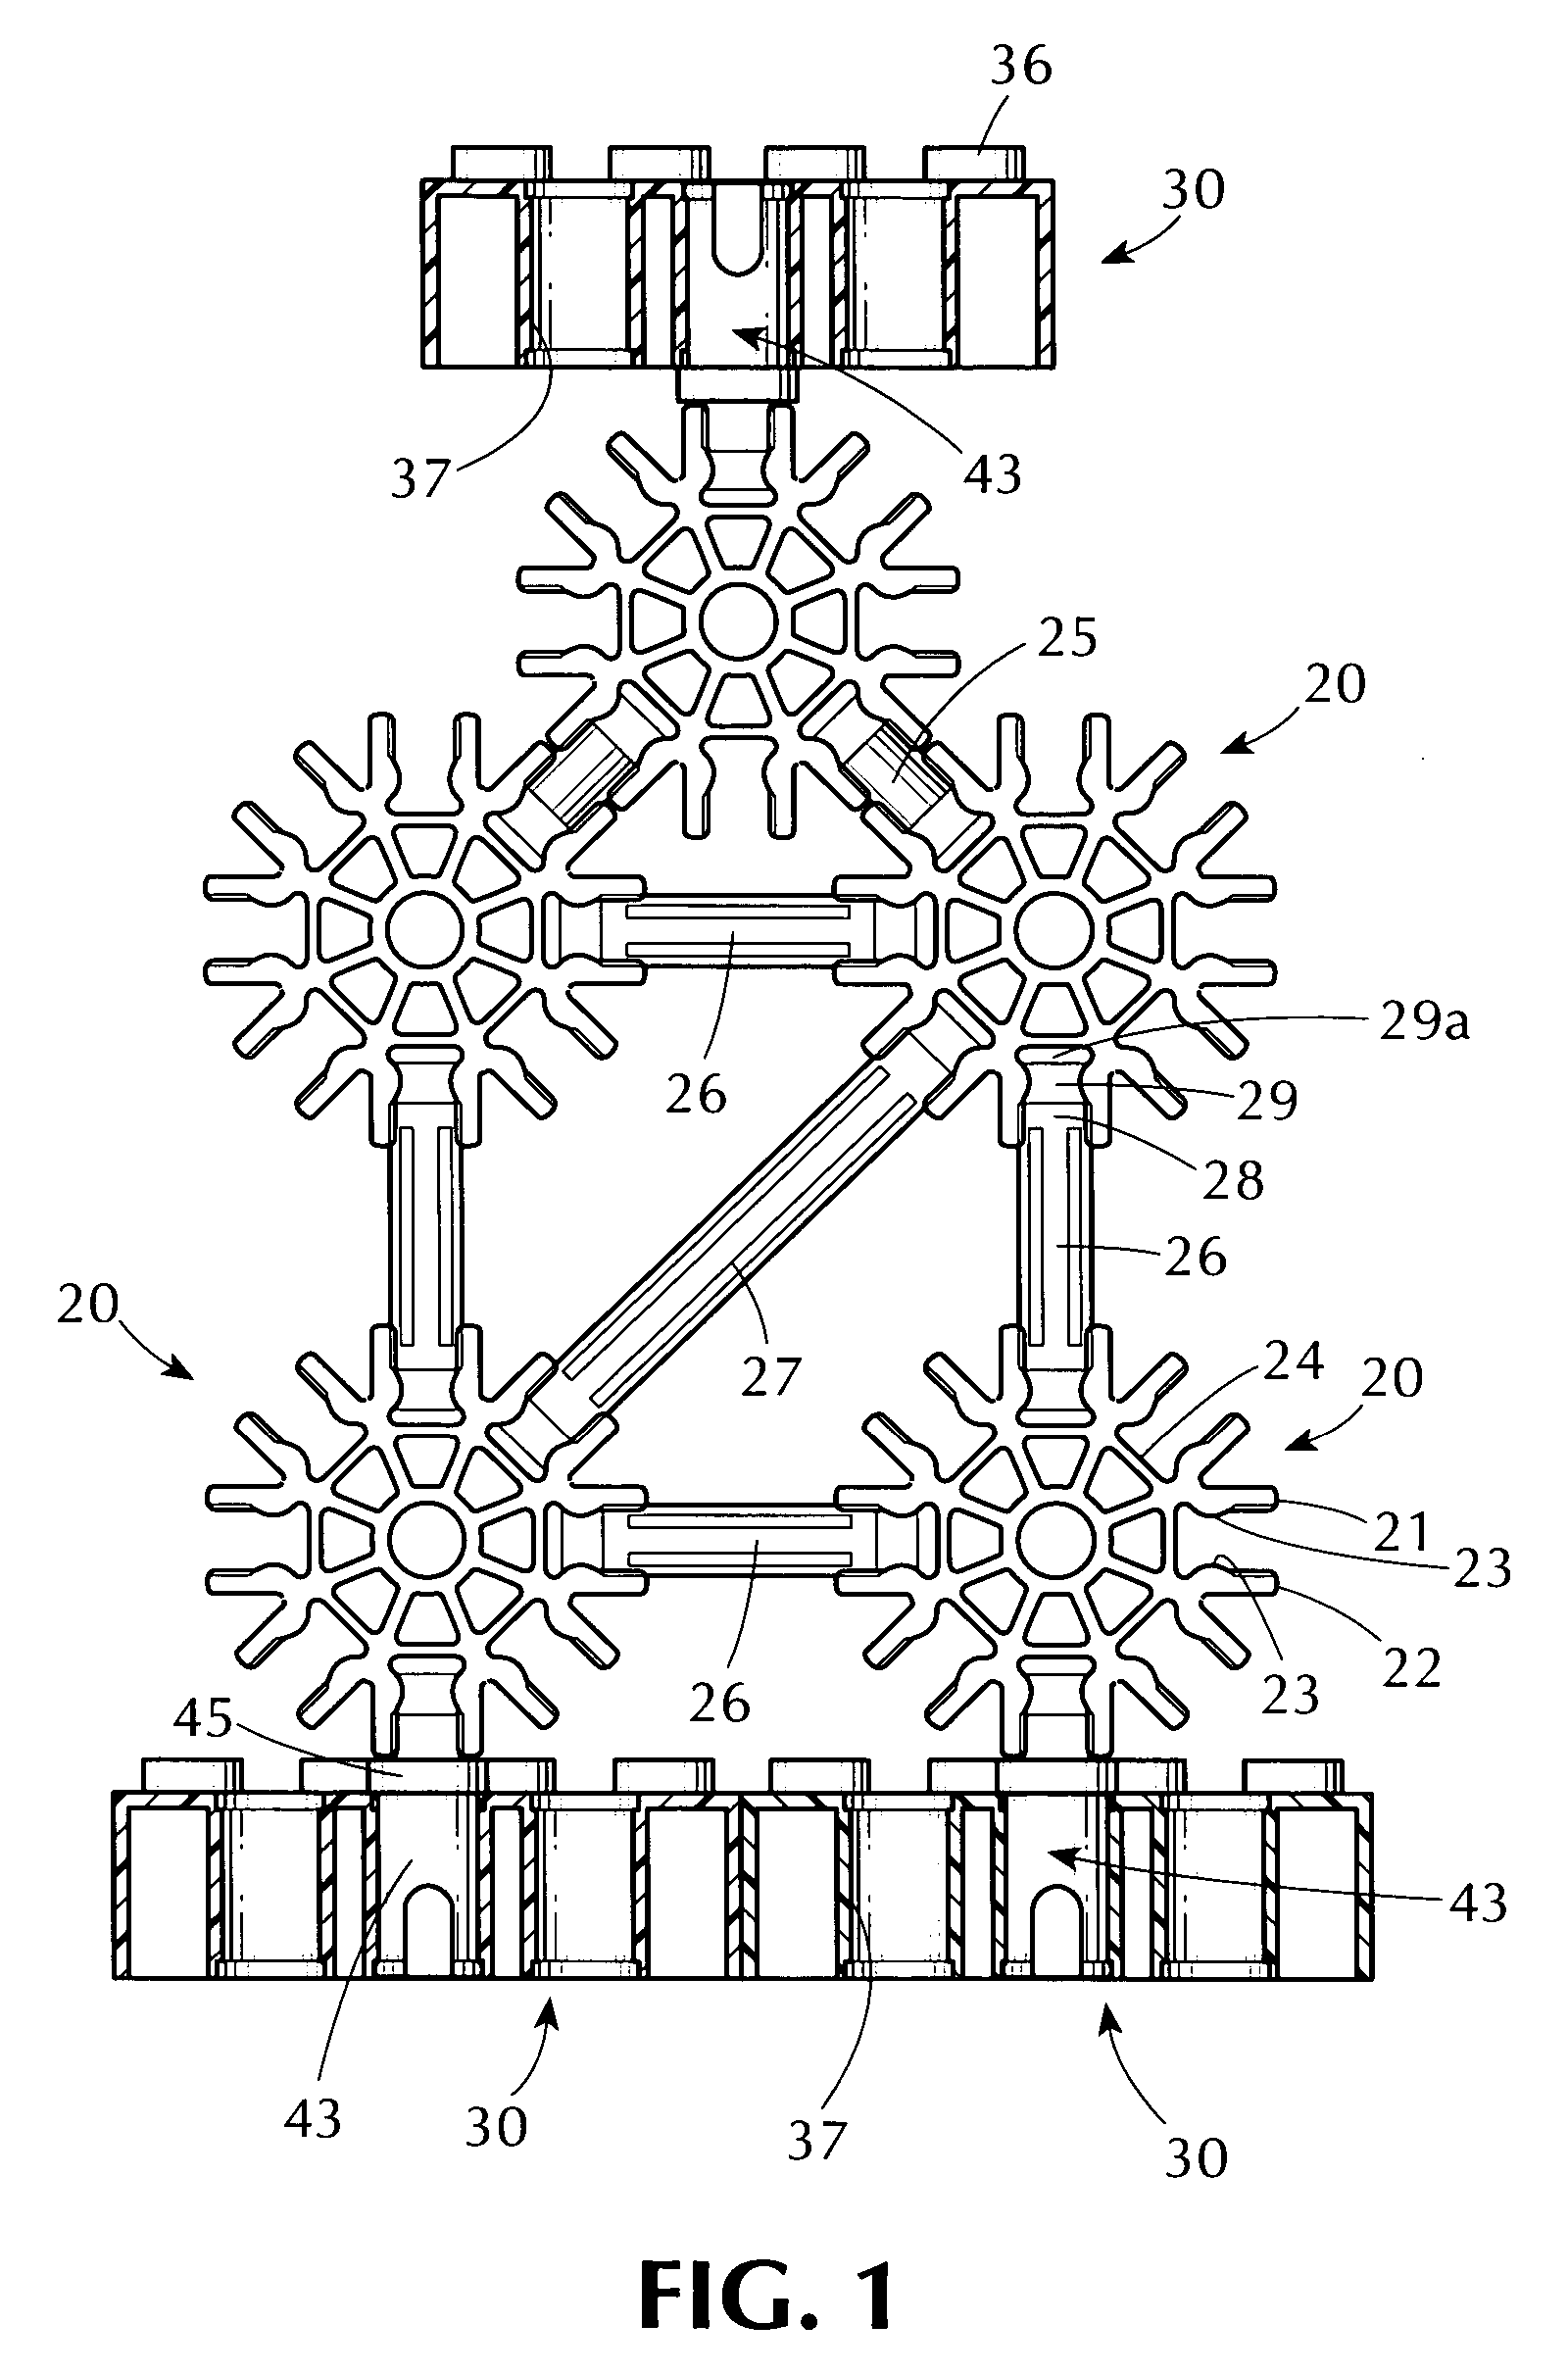 Interfacings between block type and rod and connector type construction toy sets